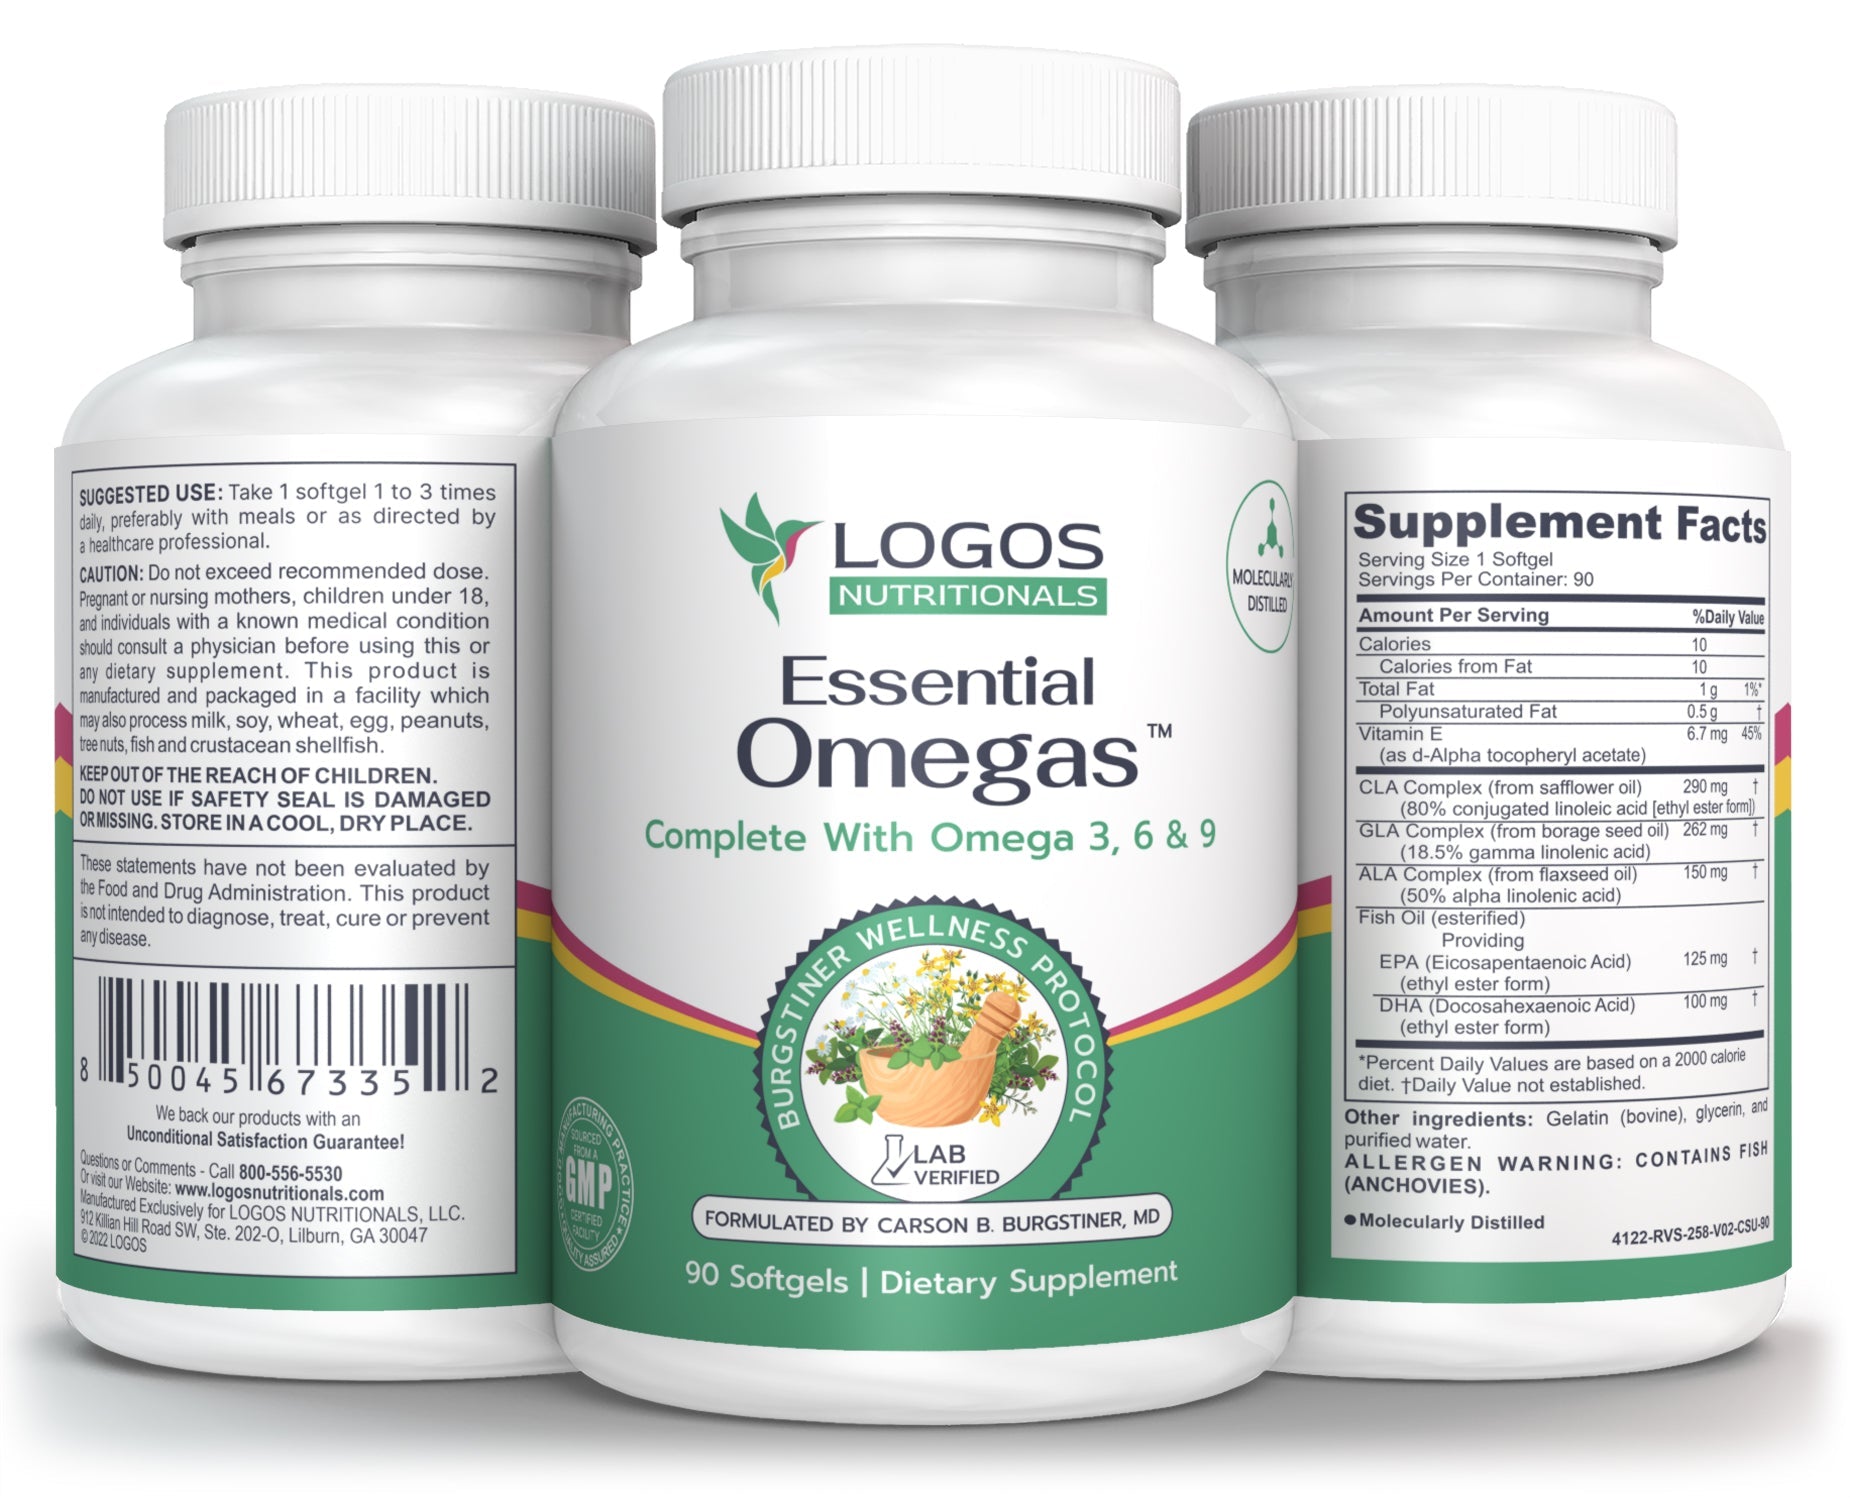 Essential Omegas™